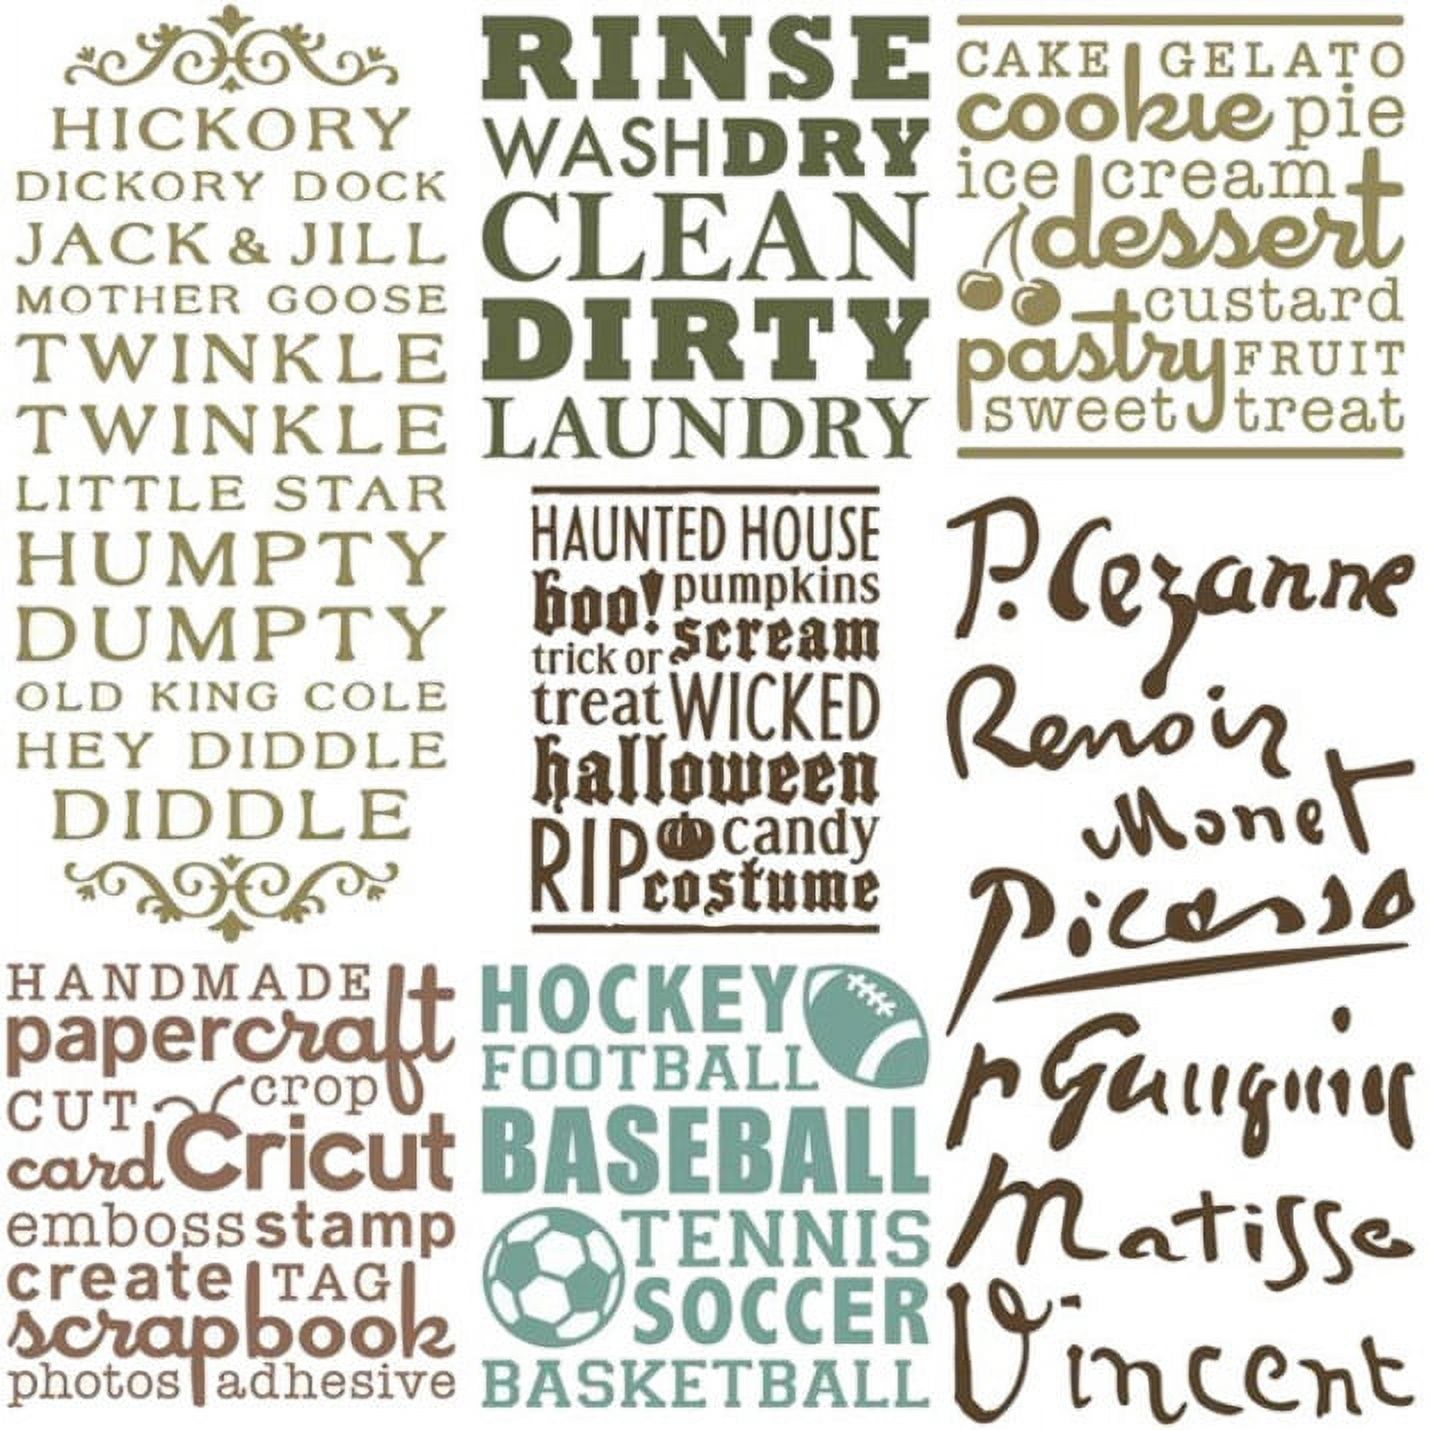 cricut Projects Cartridge, Word Collage - image 1 of 2